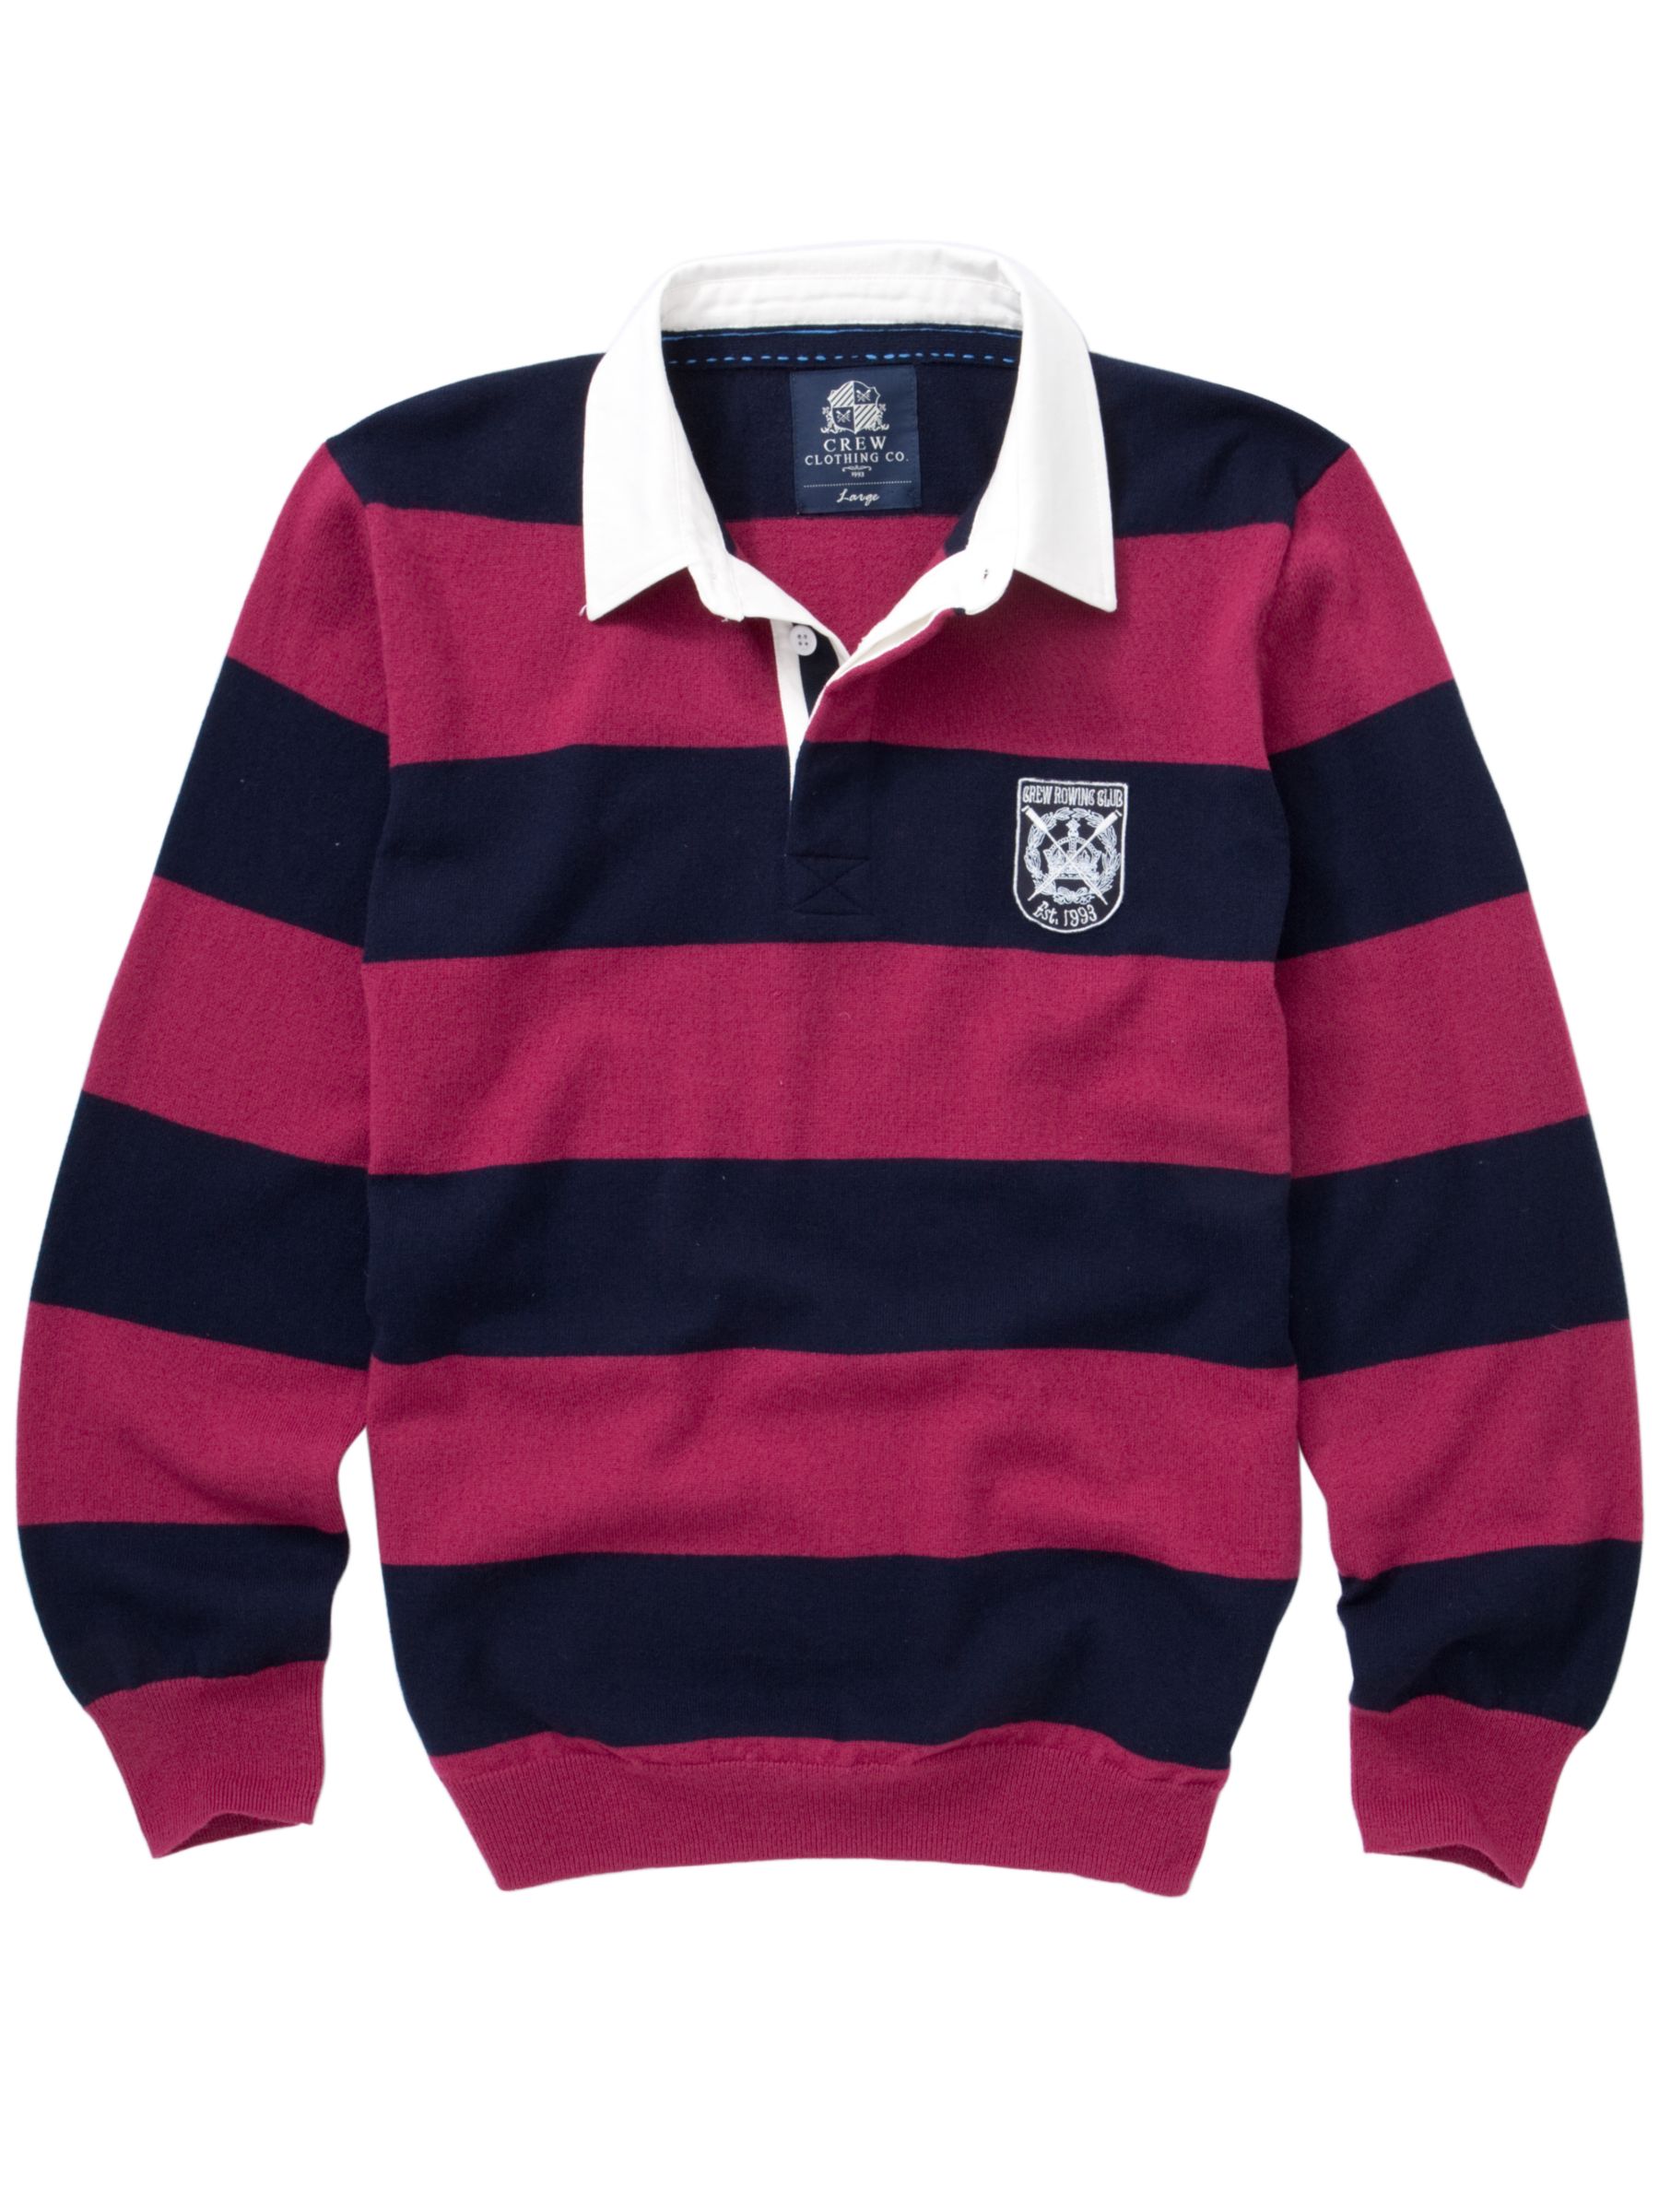 Crew Clothing Striped Knitted Rugby Shirt, Multi